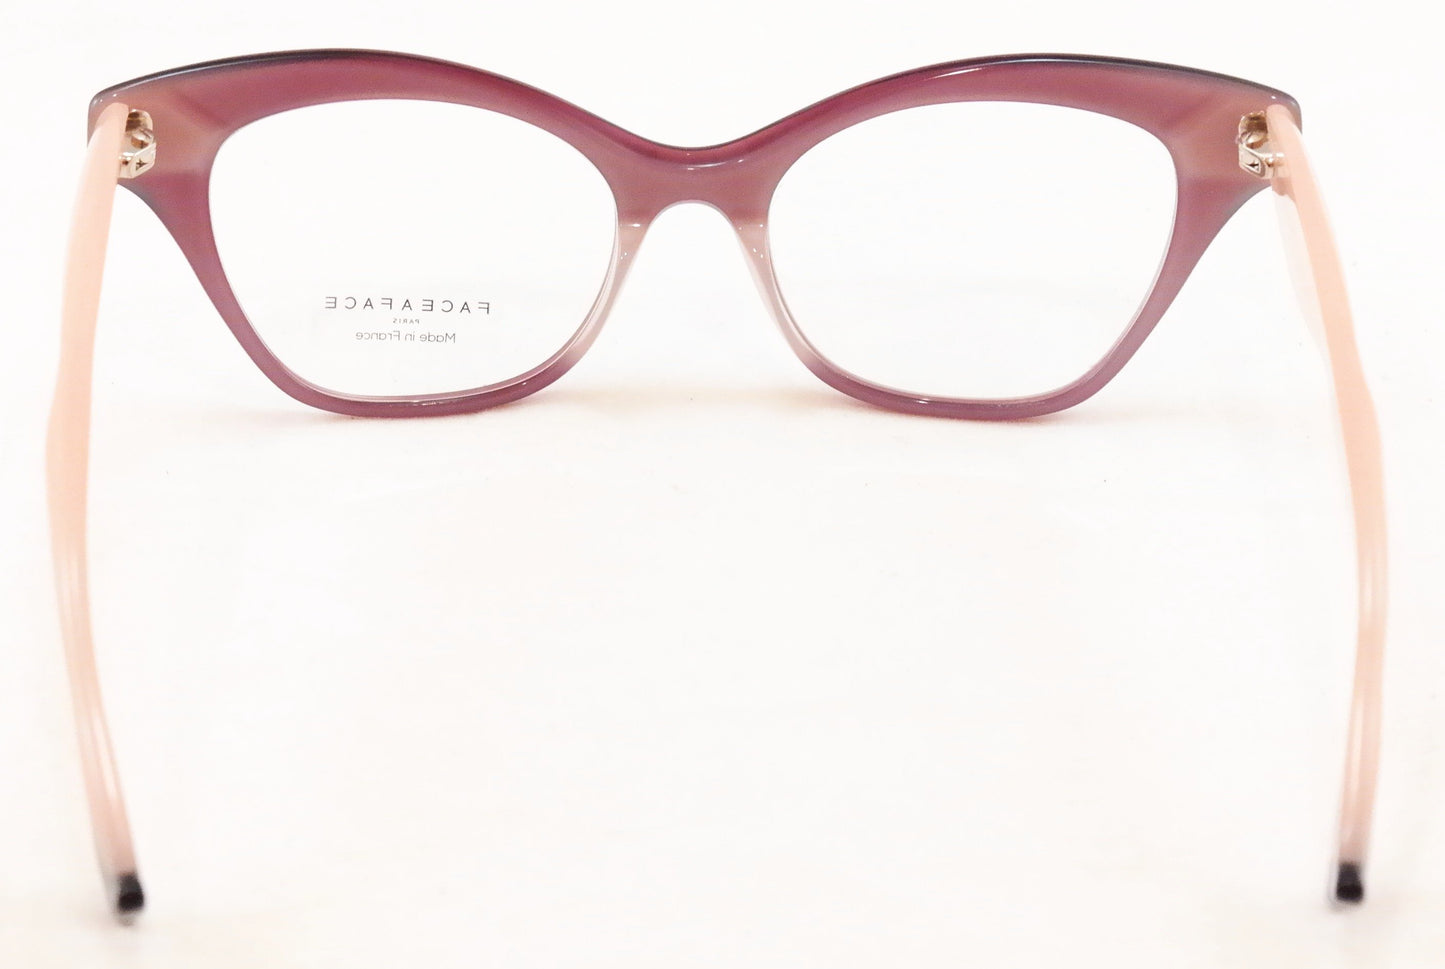 Face A Face Bocca 4 4016 Eyeglasses Amethyst Pink Italy Hand Made - Frame Bay